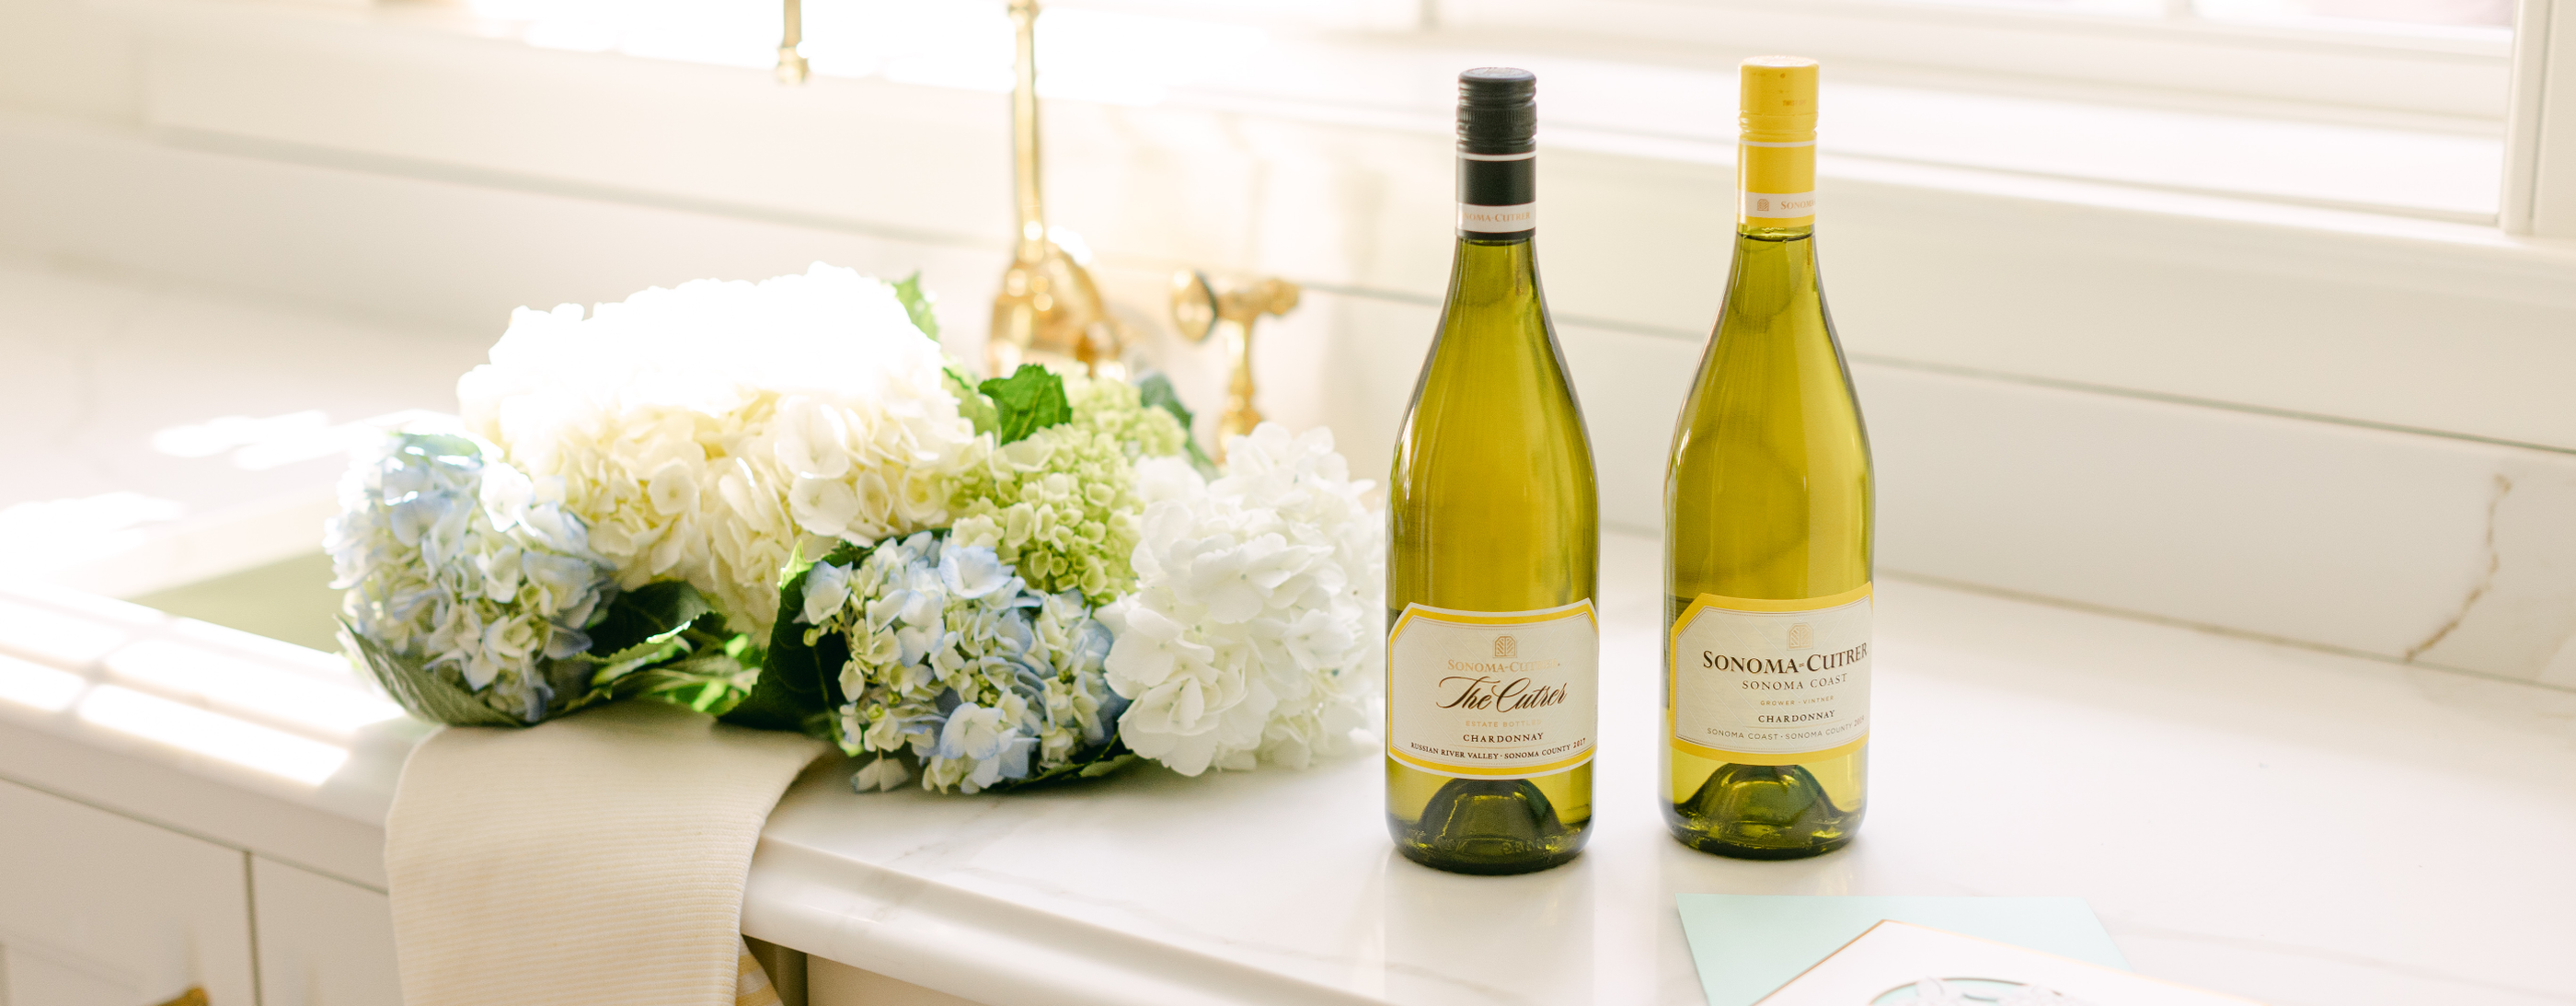 MOM WILL LOVE A BOTTLE (OR TWO) OF CHARDONNAY • GIFT Sonoma-cutrer